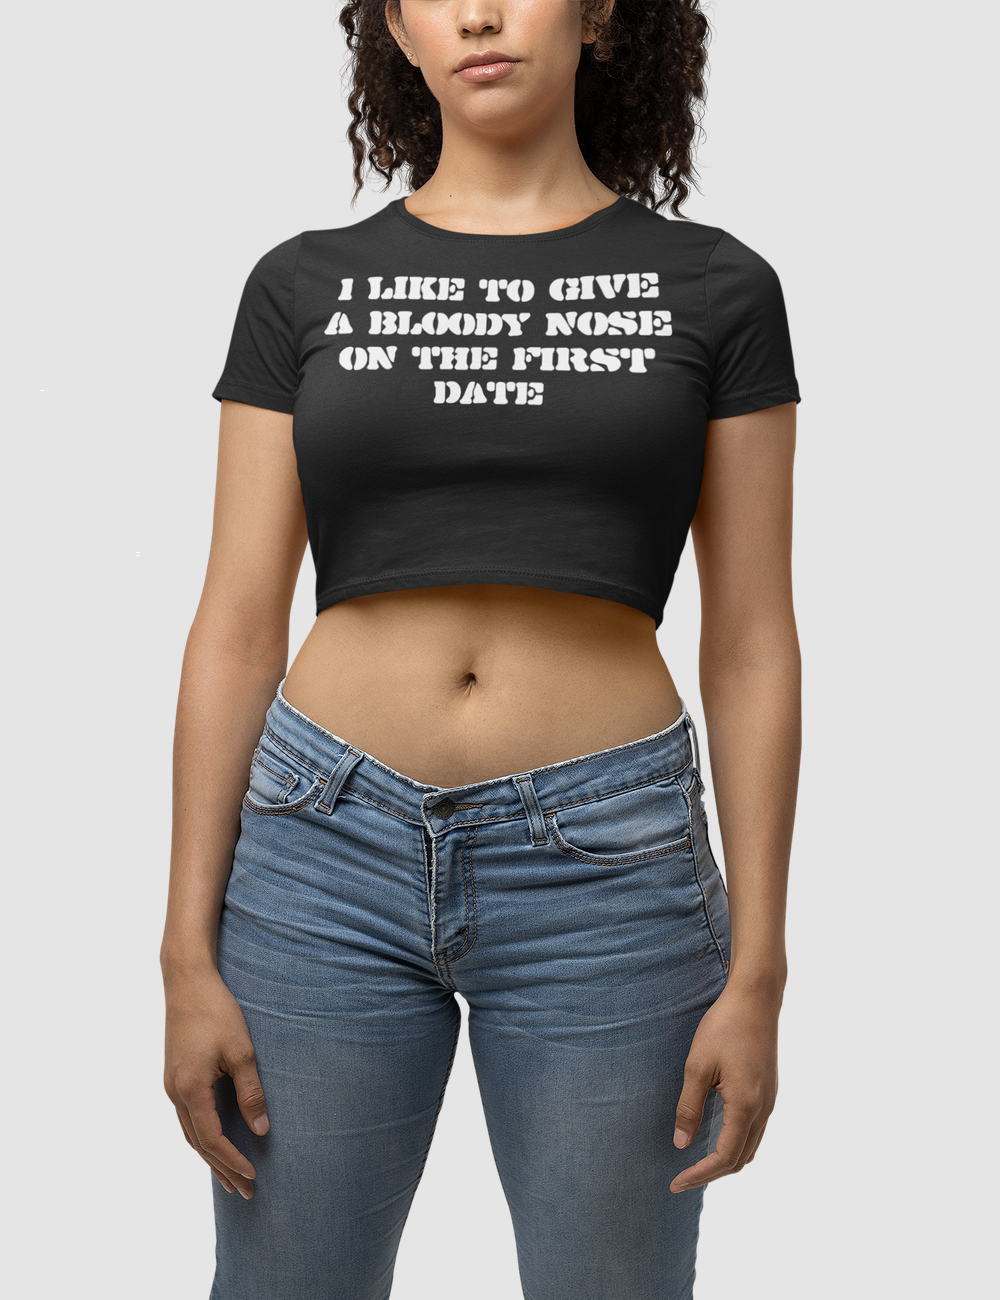 I Like To Give A Bloody Nose On The First Date | Women's Fitted Crop Top T-Shirt OniTakai